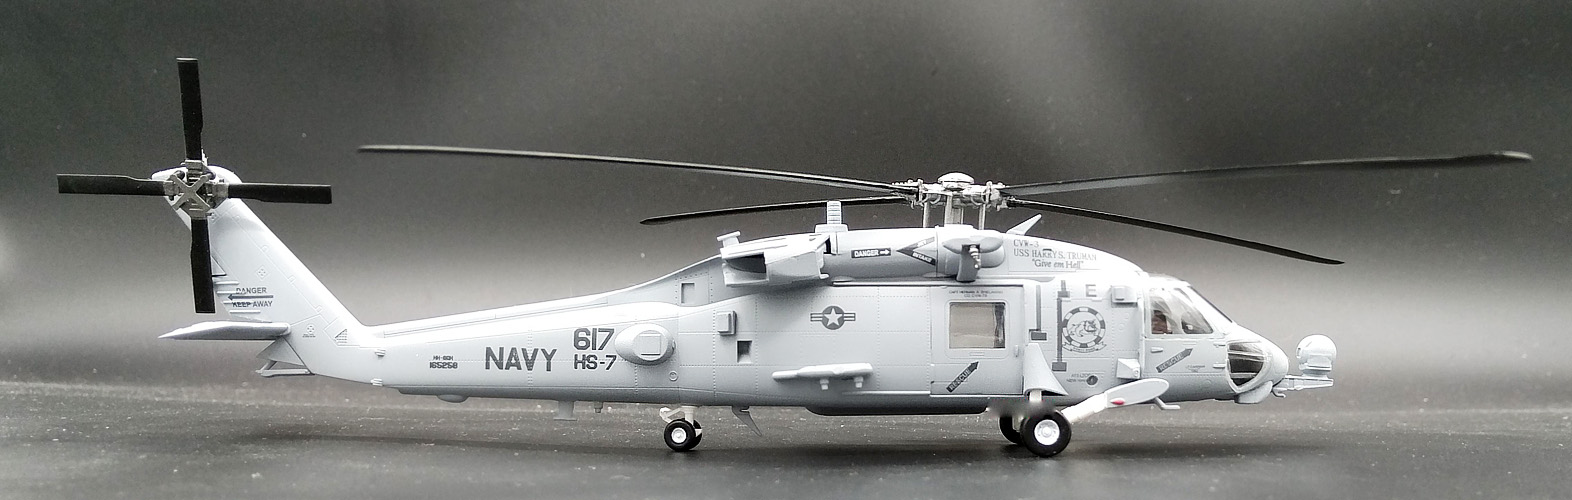 Hs-7 Dusty Dogs Sikorsky H-34 Model